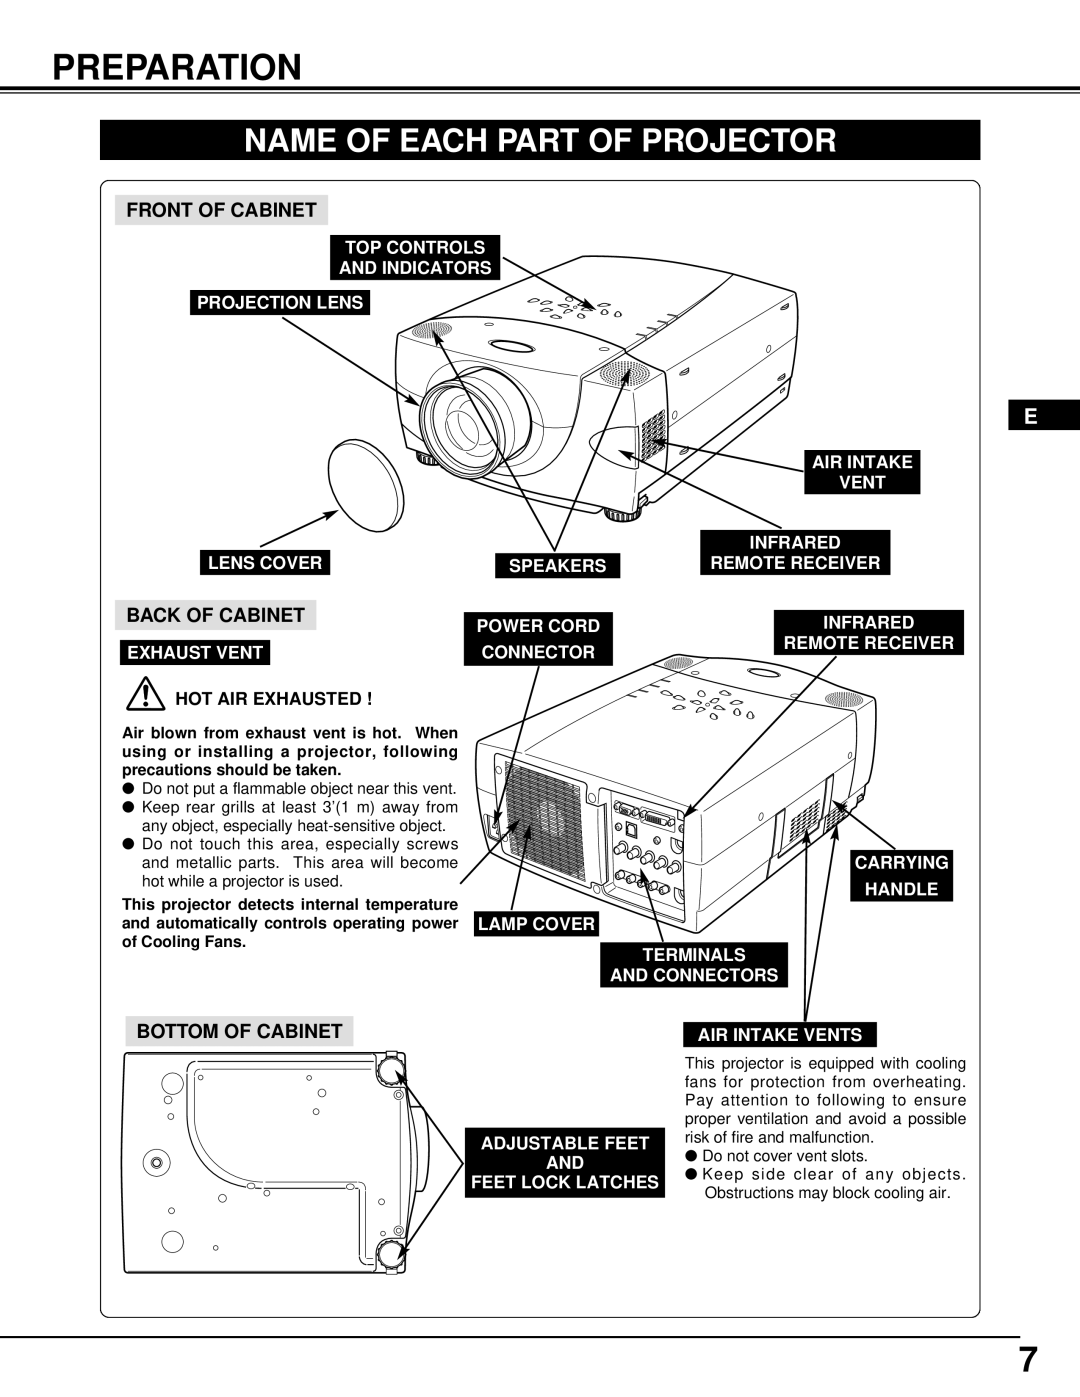 InFocus DP9295 manual Preparation, Name Of Each Part Of Projector, Front Of Cabinet, Back Of Cabinet, Bottom Of Cabinet 